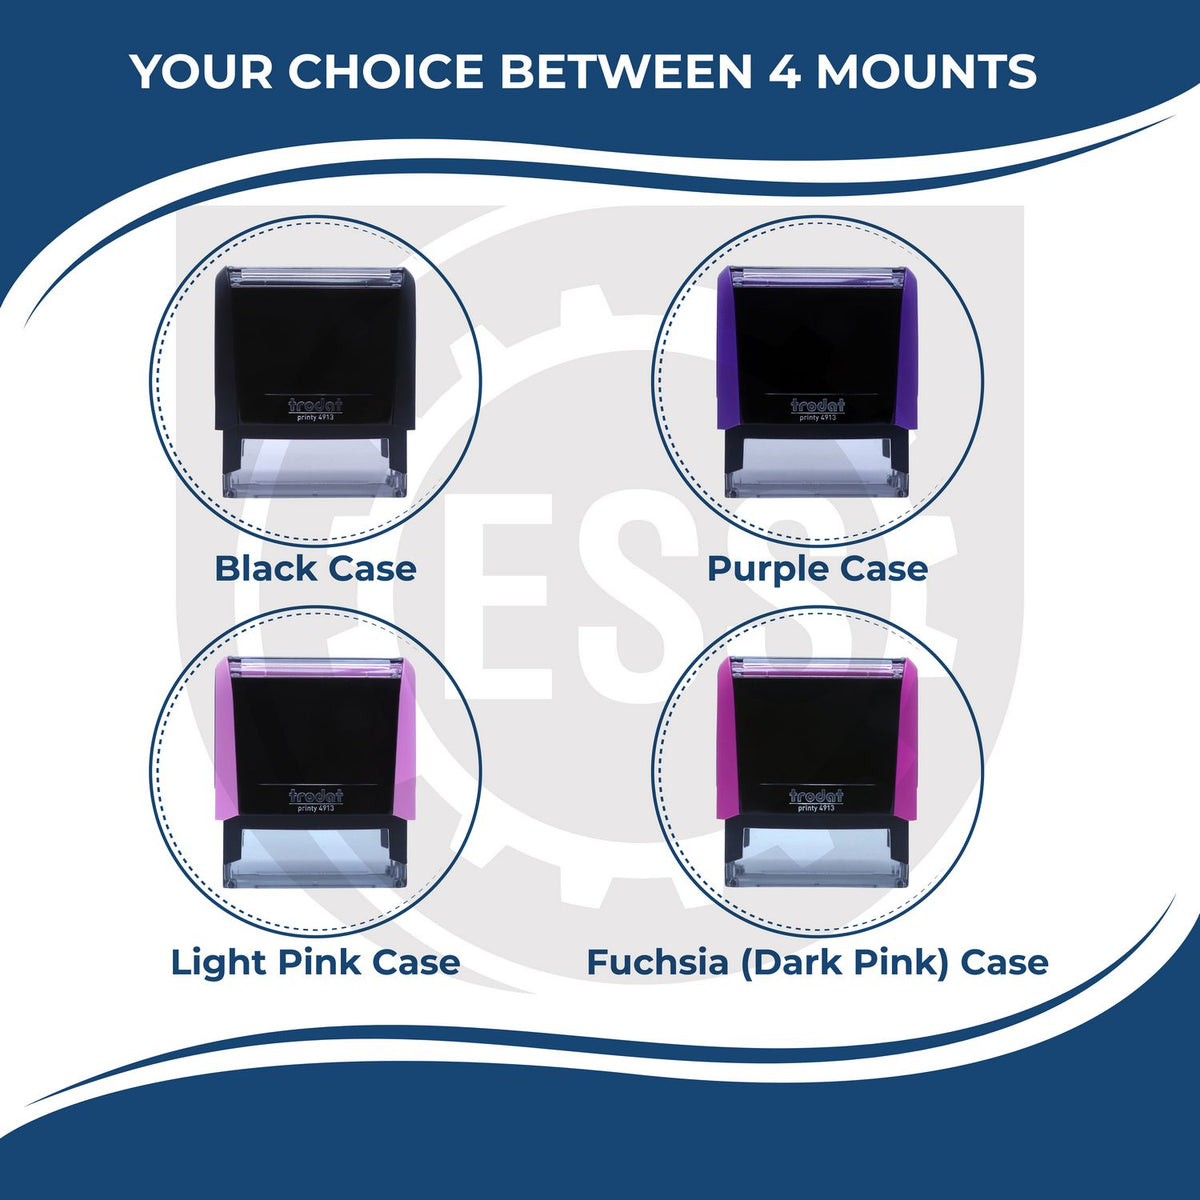 A picture of different colored mounts for the Self-Inking Rectangular Rhode Island Notary Stamp featurning a Red, Blue or Black Mount